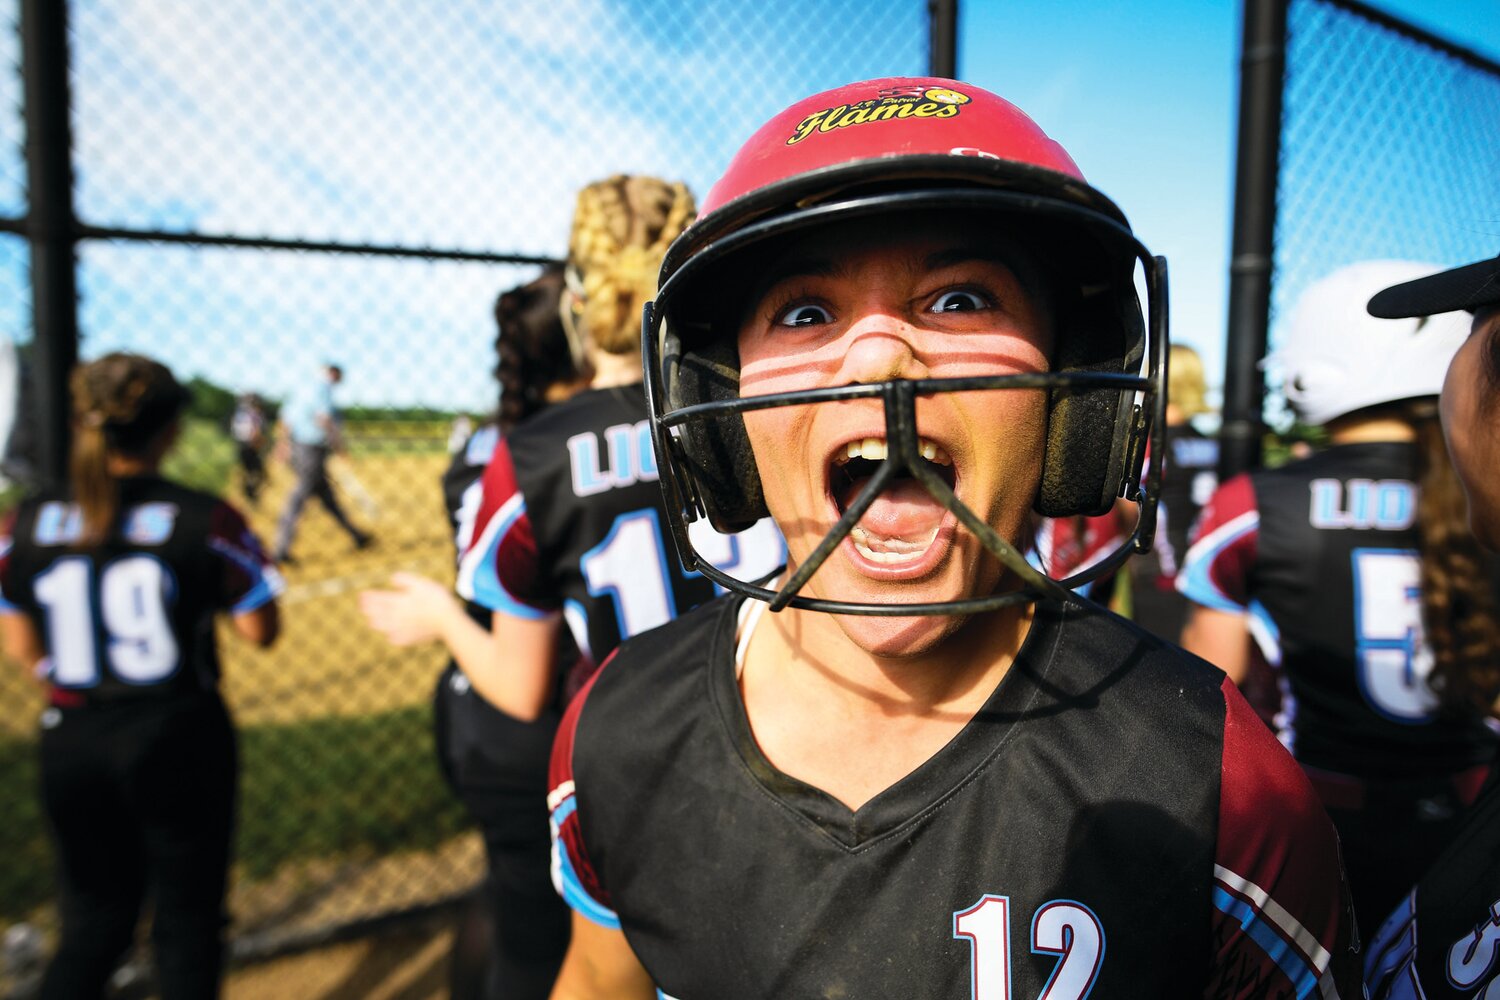 Faith Christian’s Elana Ault after scoring to cut the Dock lead to one at 7-6 in the top of the seventh inning.